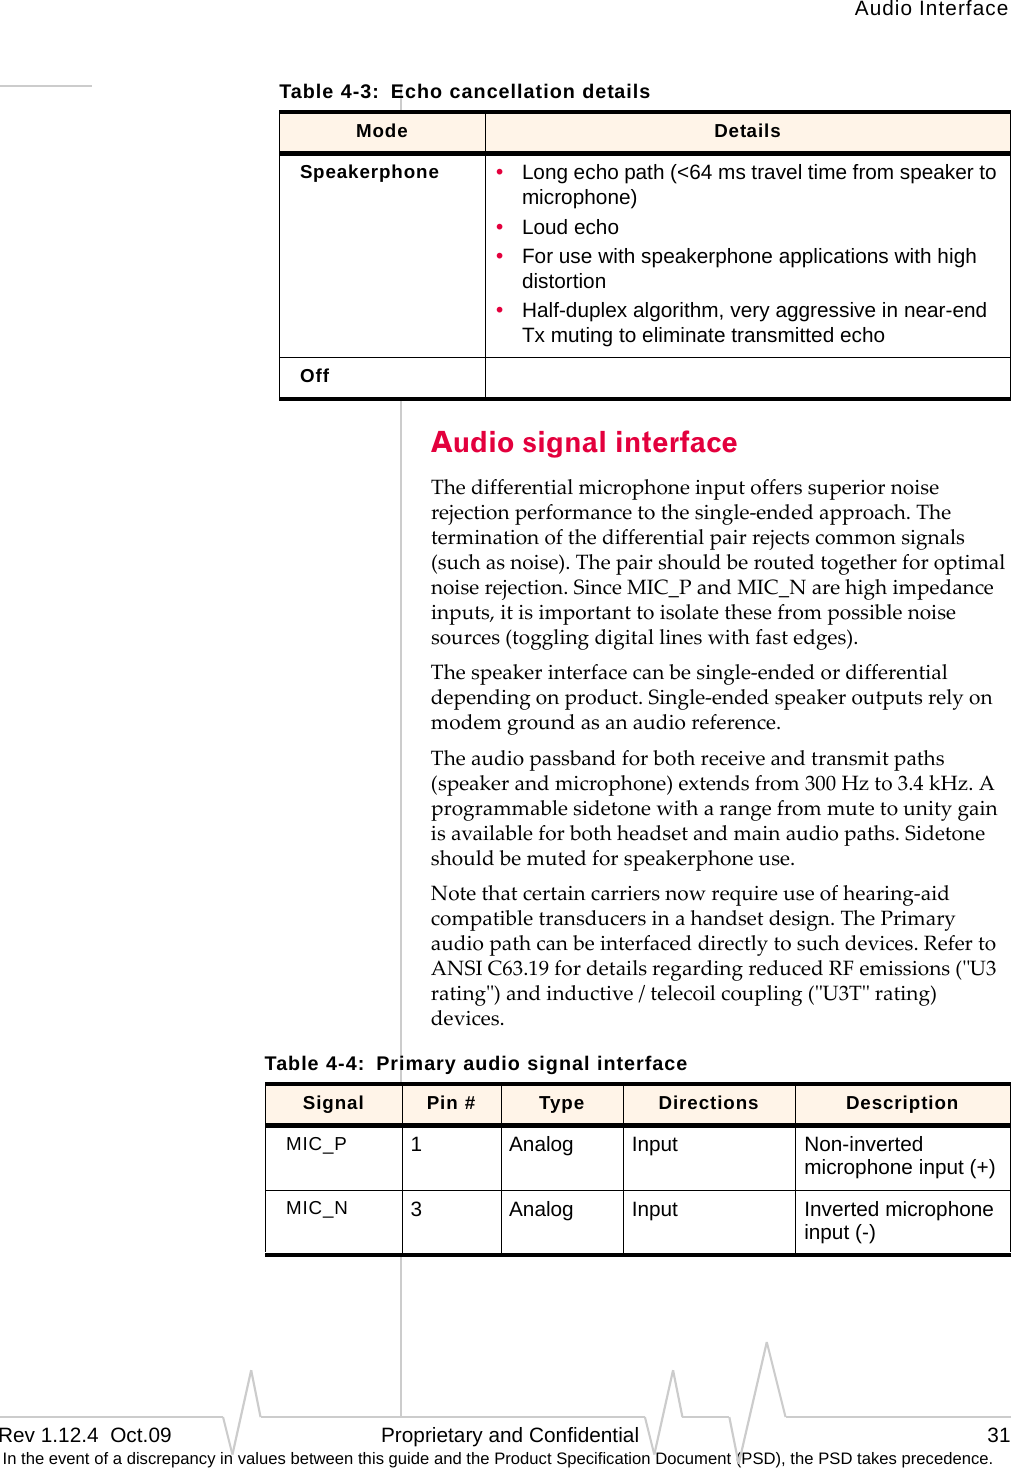 Audio InterfaceRev 1.12.4  Oct.09   Proprietary and Confidential 31 In the event of a discrepancy in values between this guide and the Product Specification Document (PSD), the PSD takes precedence.Audio signal interfaceThedifferentialmicrophoneinputofferssuperiornoiserejectionperformancetothesingle‐endedapproach.Theterminationofthedifferentialpairrejectscommonsignals(suchasnoise).Thepairshouldberoutedtogetherforoptimalnoiserejection.SinceMIC_PandMIC_Narehighimpedanceinputs,itisimportanttoisolatethesefrompossiblenoisesources(togglingdigitallineswithfastedges).Thespeakerinterfacecanbesingle‐endedordifferentialdependingonproduct.Single‐endedspeakeroutputsrelyonmodemgroundasanaudioreference.Theaudiopassbandforbothreceiveandtransmitpaths(speakerandmicrophone)extendsfrom300Hzto3.4kHz.Aprogrammablesidetonewitharangefrommutetounitygainisavailableforbothheadsetandmainaudiopaths.Sidetoneshouldbemutedforspeakerphoneuse.Notethatcertaincarriersnowrequireuseofhearing‐aidcompatibletransducersinahandsetdesign.ThePrimaryaudiopathcanbeinterfaceddirectlytosuchdevices.RefertoANSIC63.19fordetailsregardingreducedRFemissions(ʺU3ratingʺ)andinductive/telecoilcoupling(ʺU3Tʺrating)devices.Speakerphone •Long echo path (&lt;64 ms travel time from speaker to microphone)•Loud echo•For use with speakerphone applications with high distortion•Half-duplex algorithm, very aggressive in near-end Tx muting to eliminate transmitted echoOffTable 4-3:  Echo cancellation detailsMode DetailsTable 4-4:  Primary audio signal interfaceSignal Pin # Type Directions DescriptionMIC_P 1Analog Input Non-inverted microphone input (+)MIC_N 3Analog Input Inverted microphone input (-)